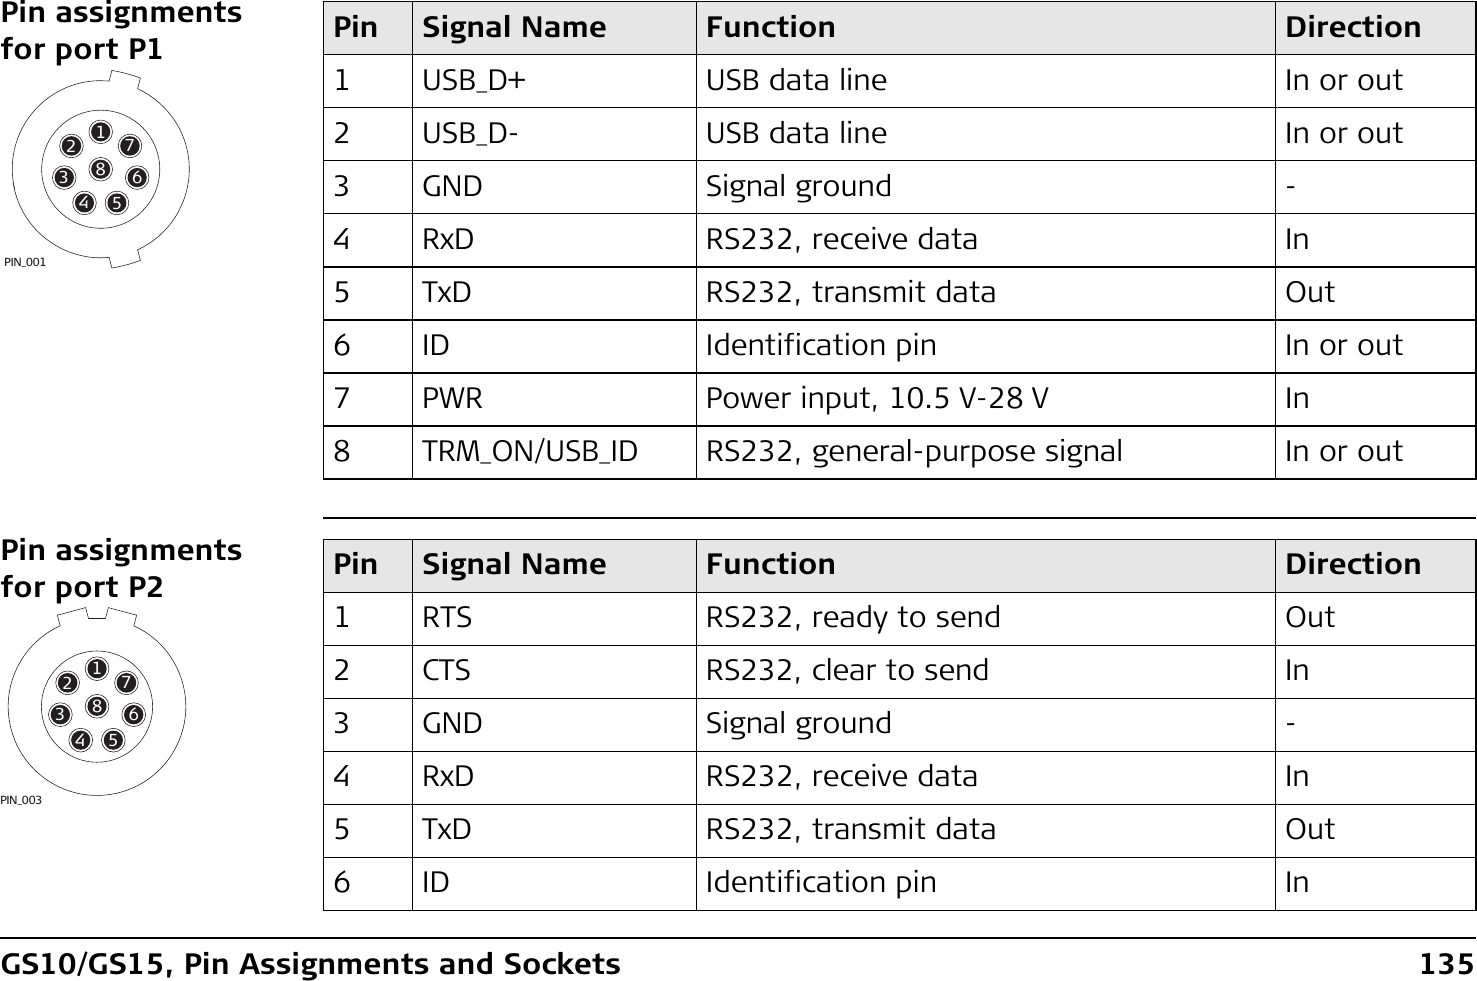 GS10/GS15, Pin Assignments and Sockets 135Pin assignments for port P1Pin assignments for port P217685432PIN_001Pin Signal Name Function Direction1 USB_D+ USB data line In or out2 USB_D- USB data line In or out3 GND Signal ground -4 RxD RS232, receive data In5 TxD RS232, transmit data Out6 ID Identification pin In or out7 PWR Power input, 10.5 V-28 V In8 TRM_ON/USB_ID RS232, general-purpose signal In or out17685432PIN_003Pin Signal Name Function Direction1 RTS RS232, ready to send Out2 CTS RS232, clear to send In3 GND Signal ground -4 RxD RS232, receive data In5 TxD RS232, transmit data Out6 ID Identification pin In